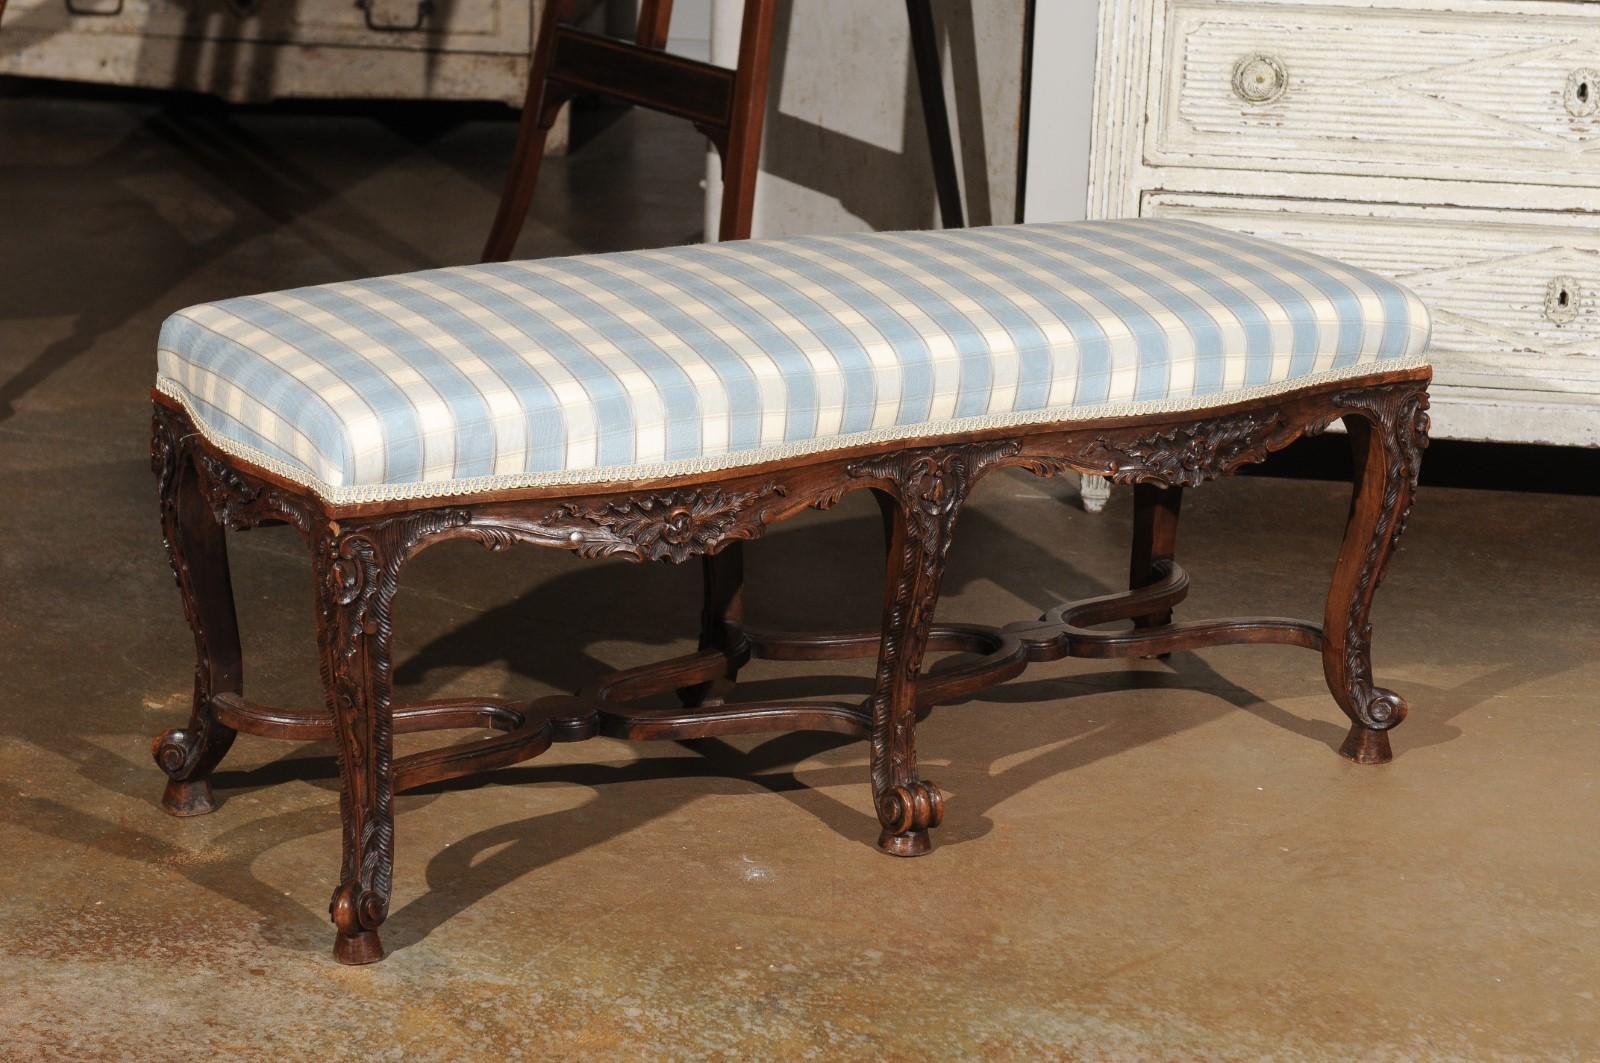 A French Regence style carved wooden bench from the 19th century, with X-form cross stretcher, foliage décor and new checkered upholstery. This exquisite French backless bench features a rectangular seat recovered with a soft blue and white checkred